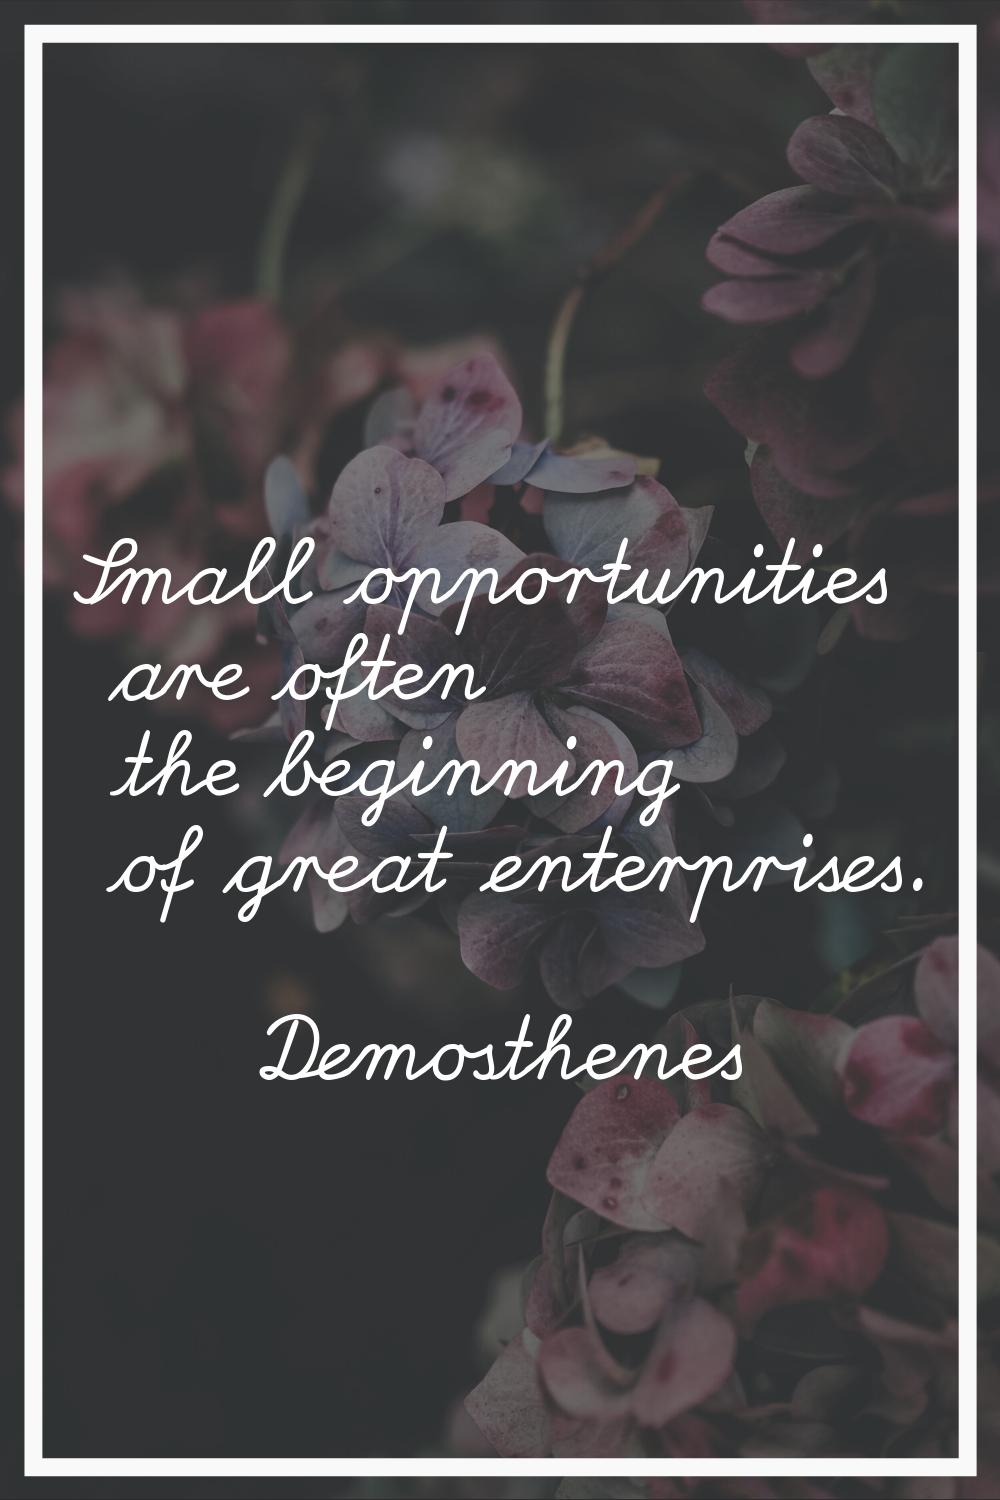 Small opportunities are often the beginning of great enterprises.